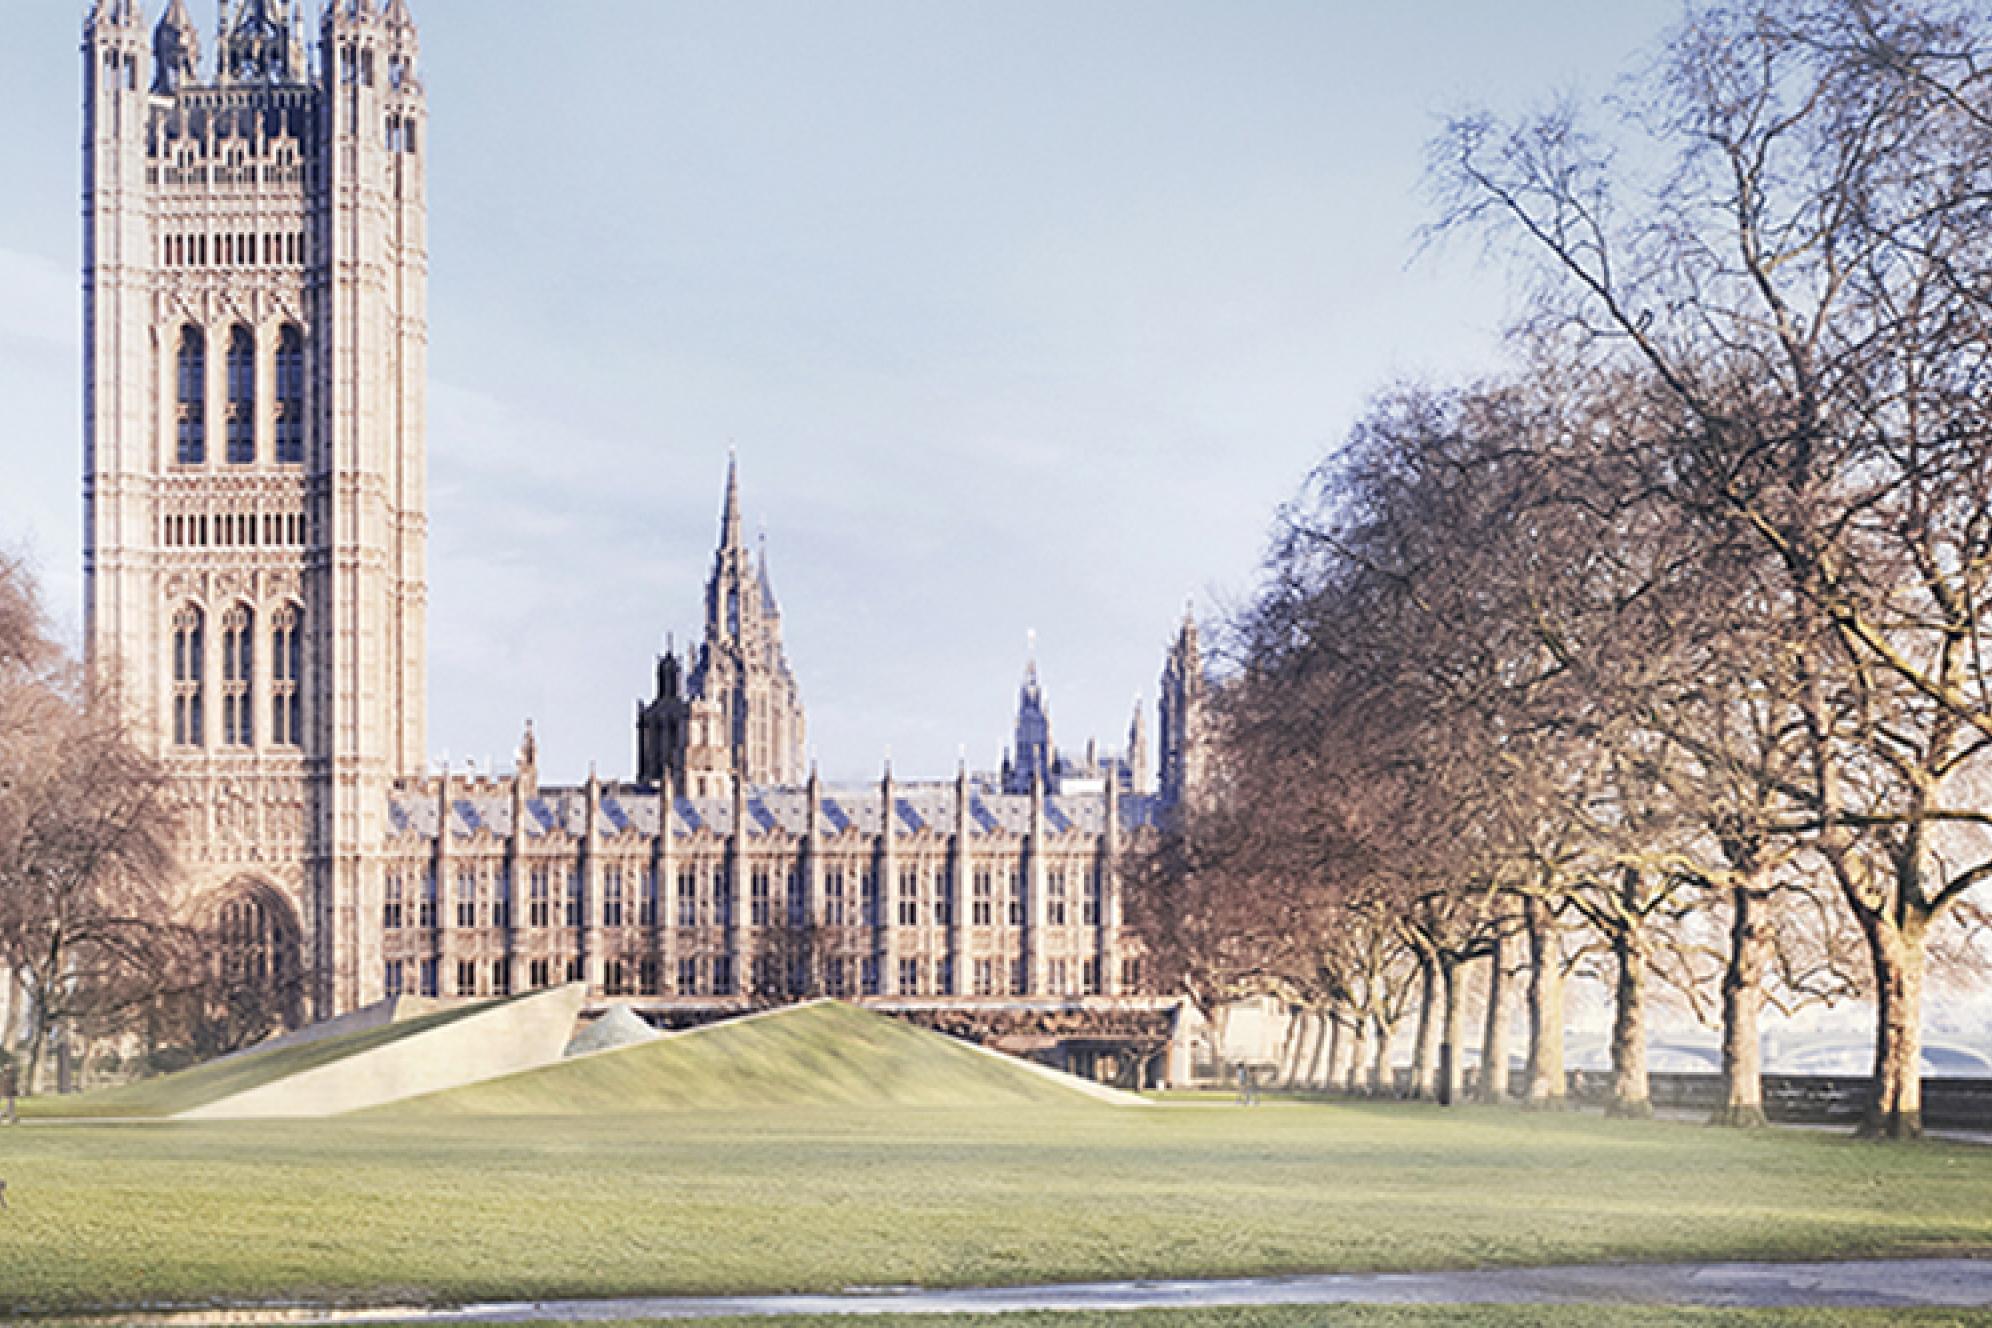 Rendering: View from the Palace of Westminster